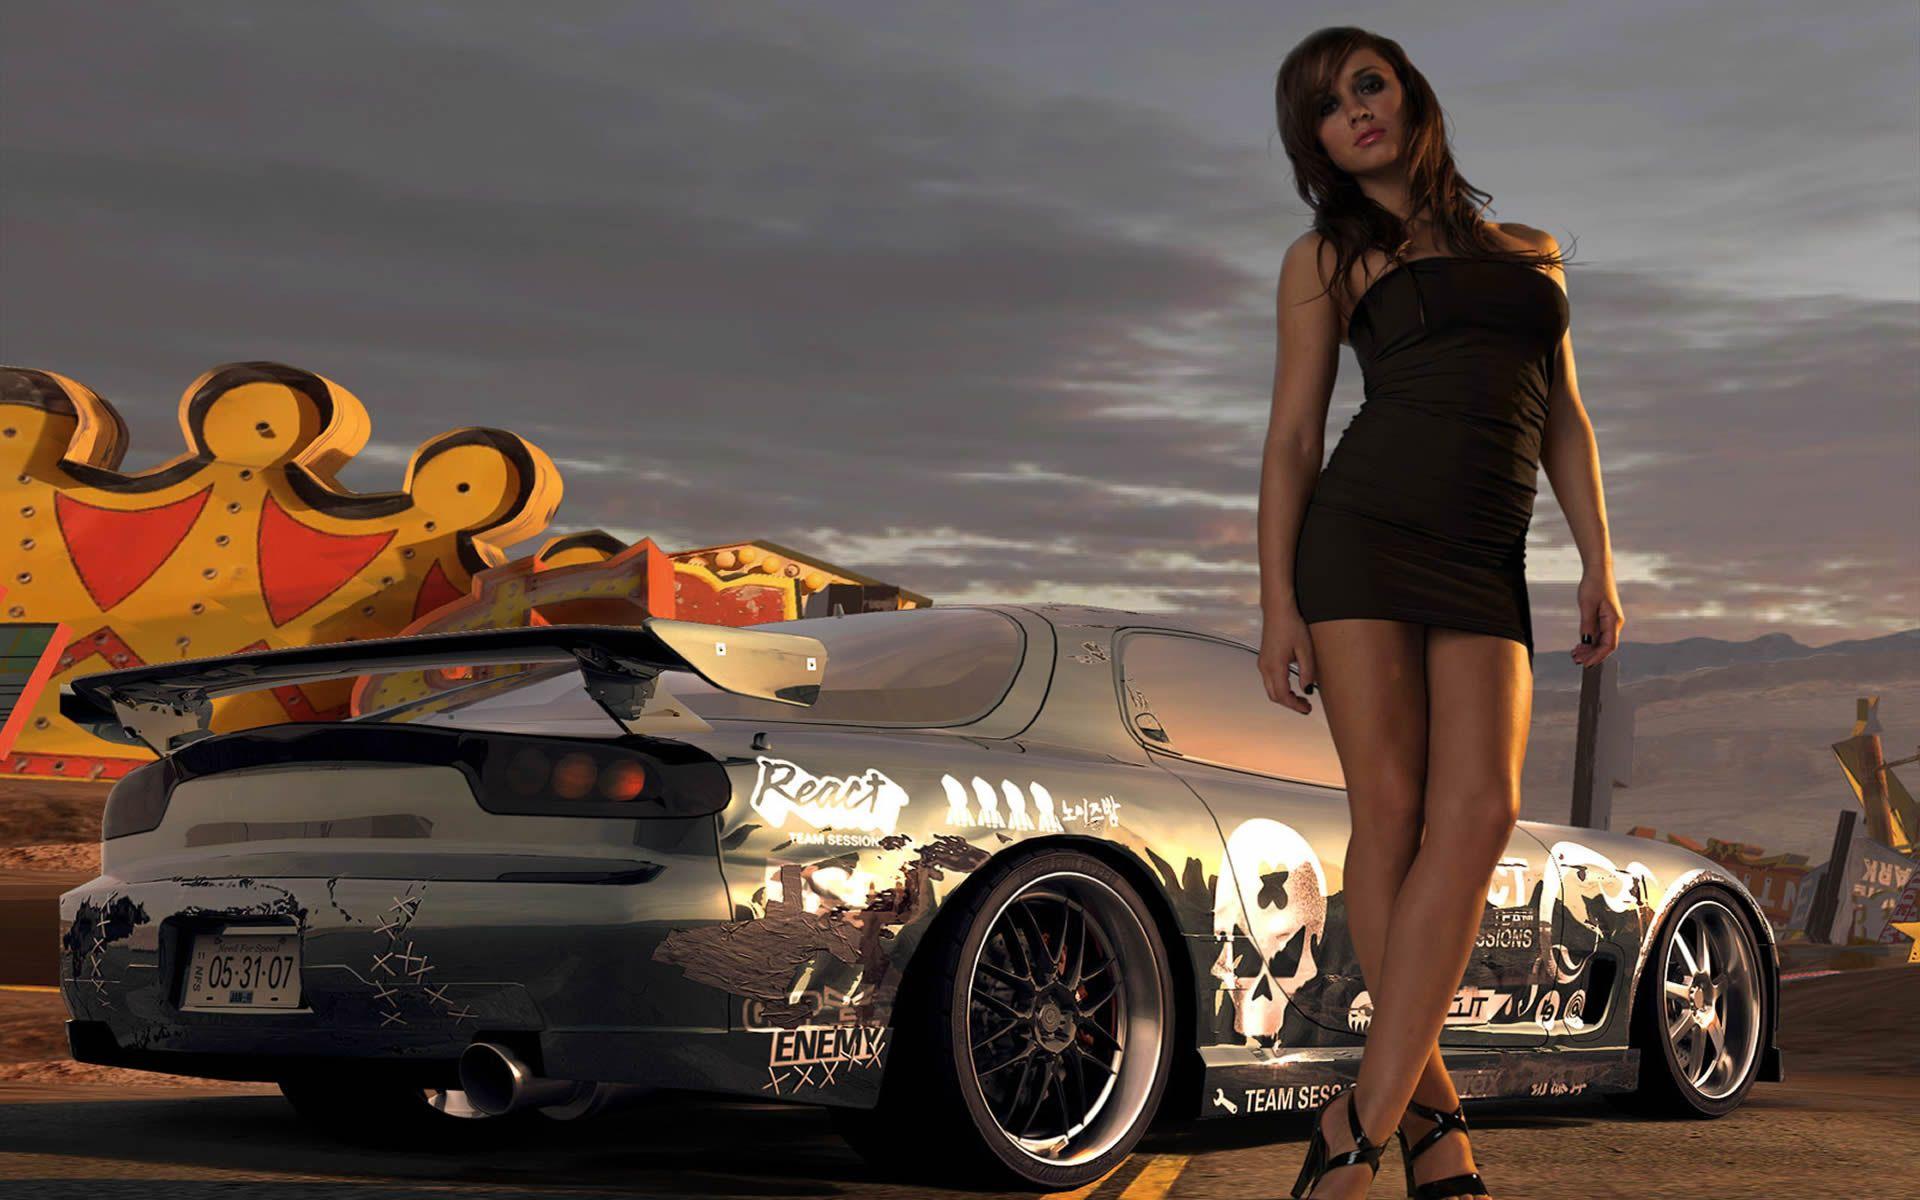 561668 1920x1080 need for speed most wanted mia women with cars josie maran  wallpaper JPG 213 kB - Rare Gallery HD Wallpapers